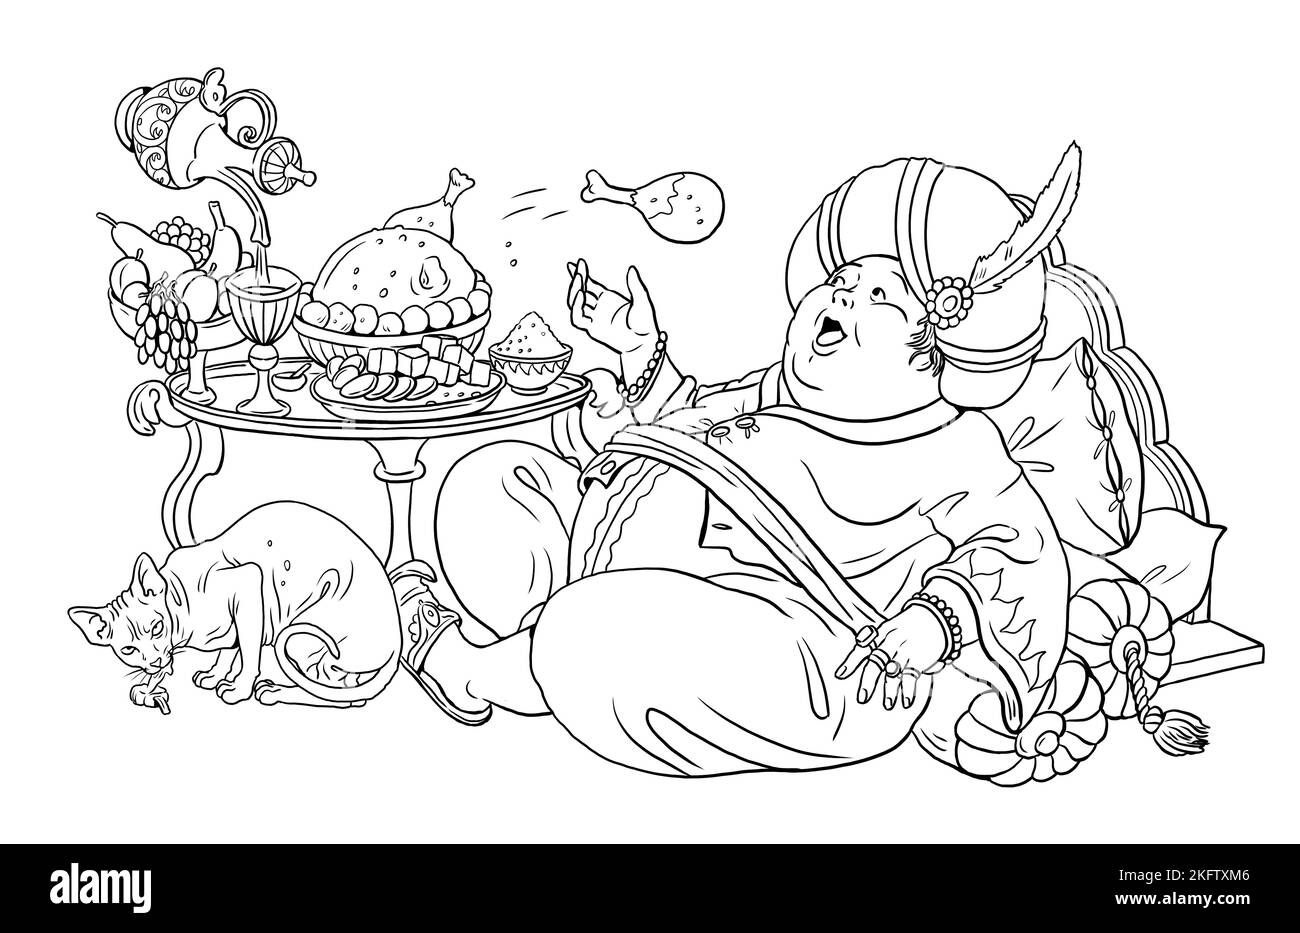 Fat funny magician from oriental fairy tale. Coloring page with the magician. Coloring template with wizard. Stock Photo